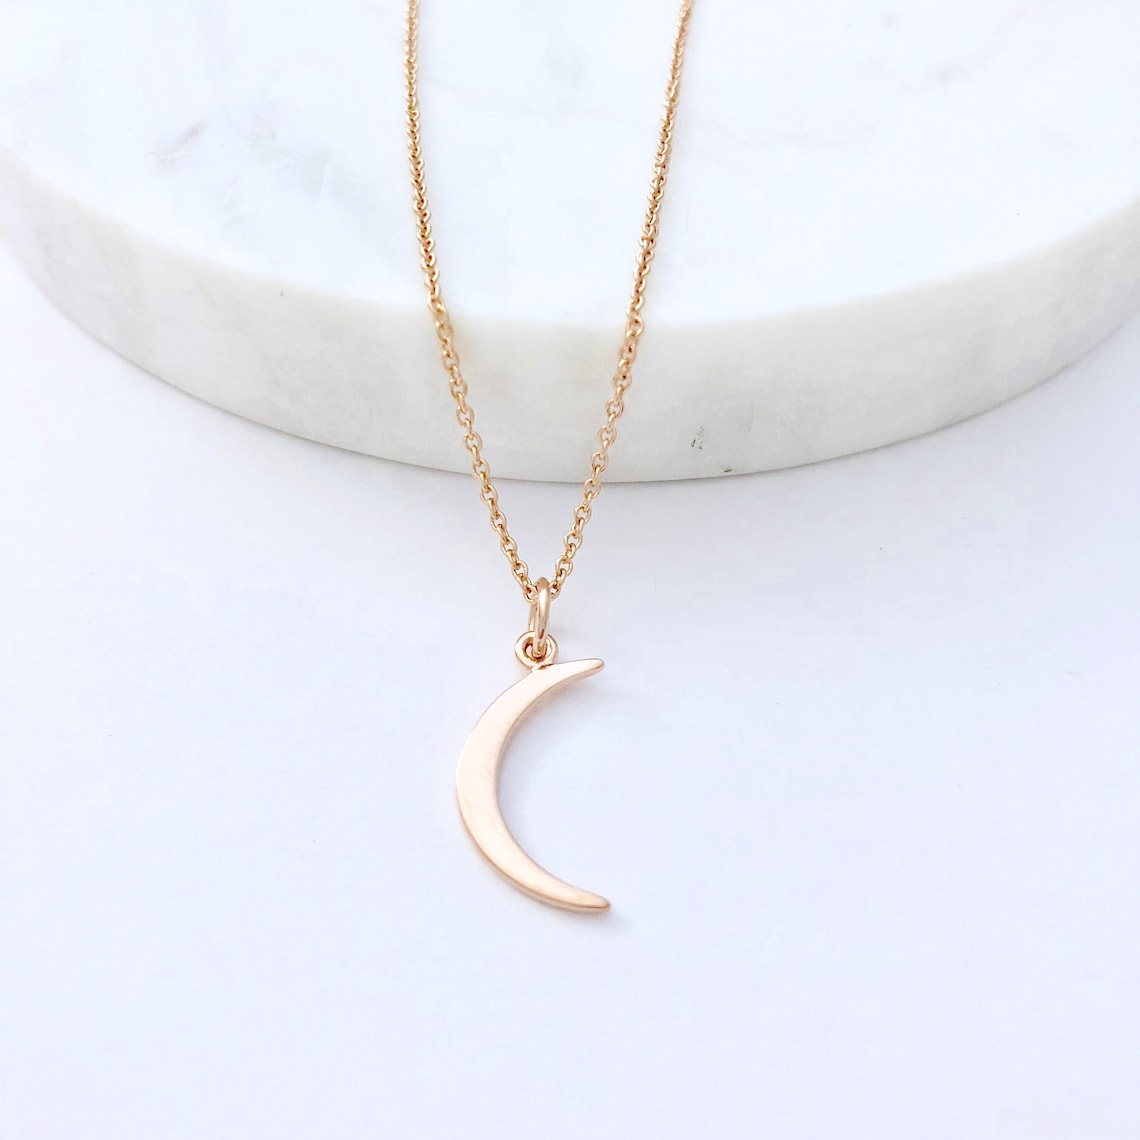 Gold Moon Necklace Silver Moon Necklace Crescent Moon Moon | Etsy